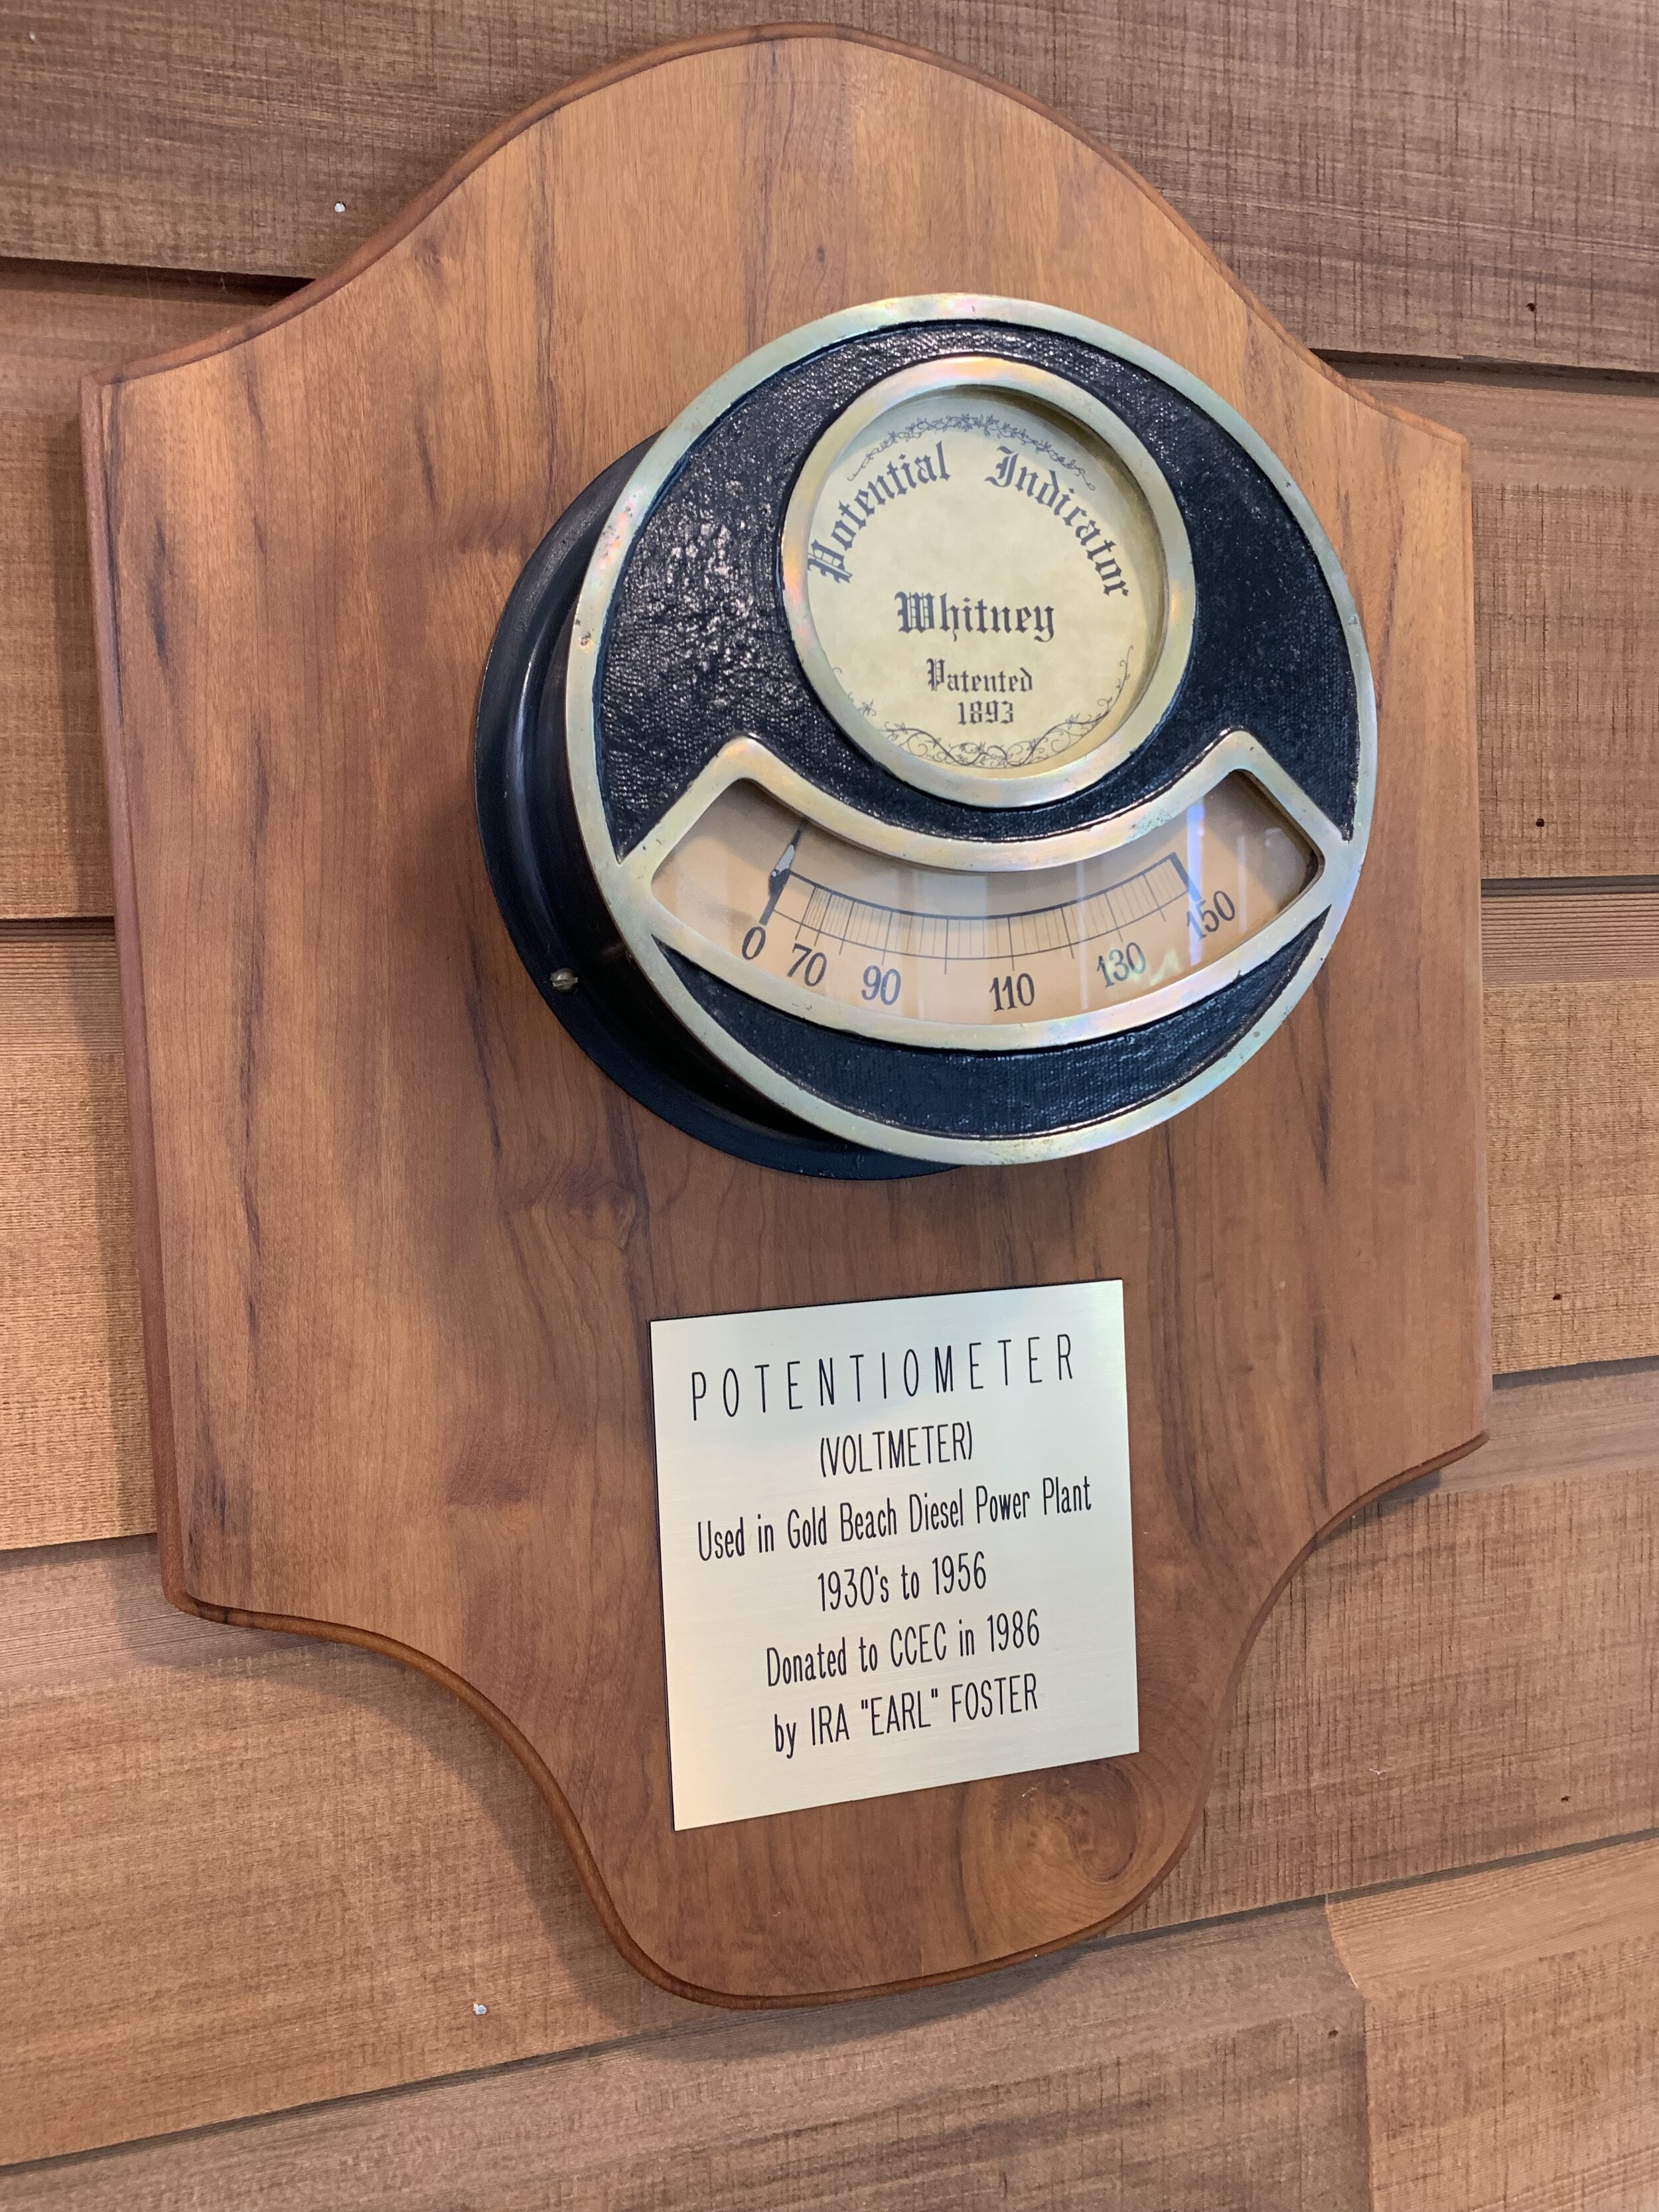 Coos Curry Electric Co-op displays an old voltmeter from a 1930s power plant